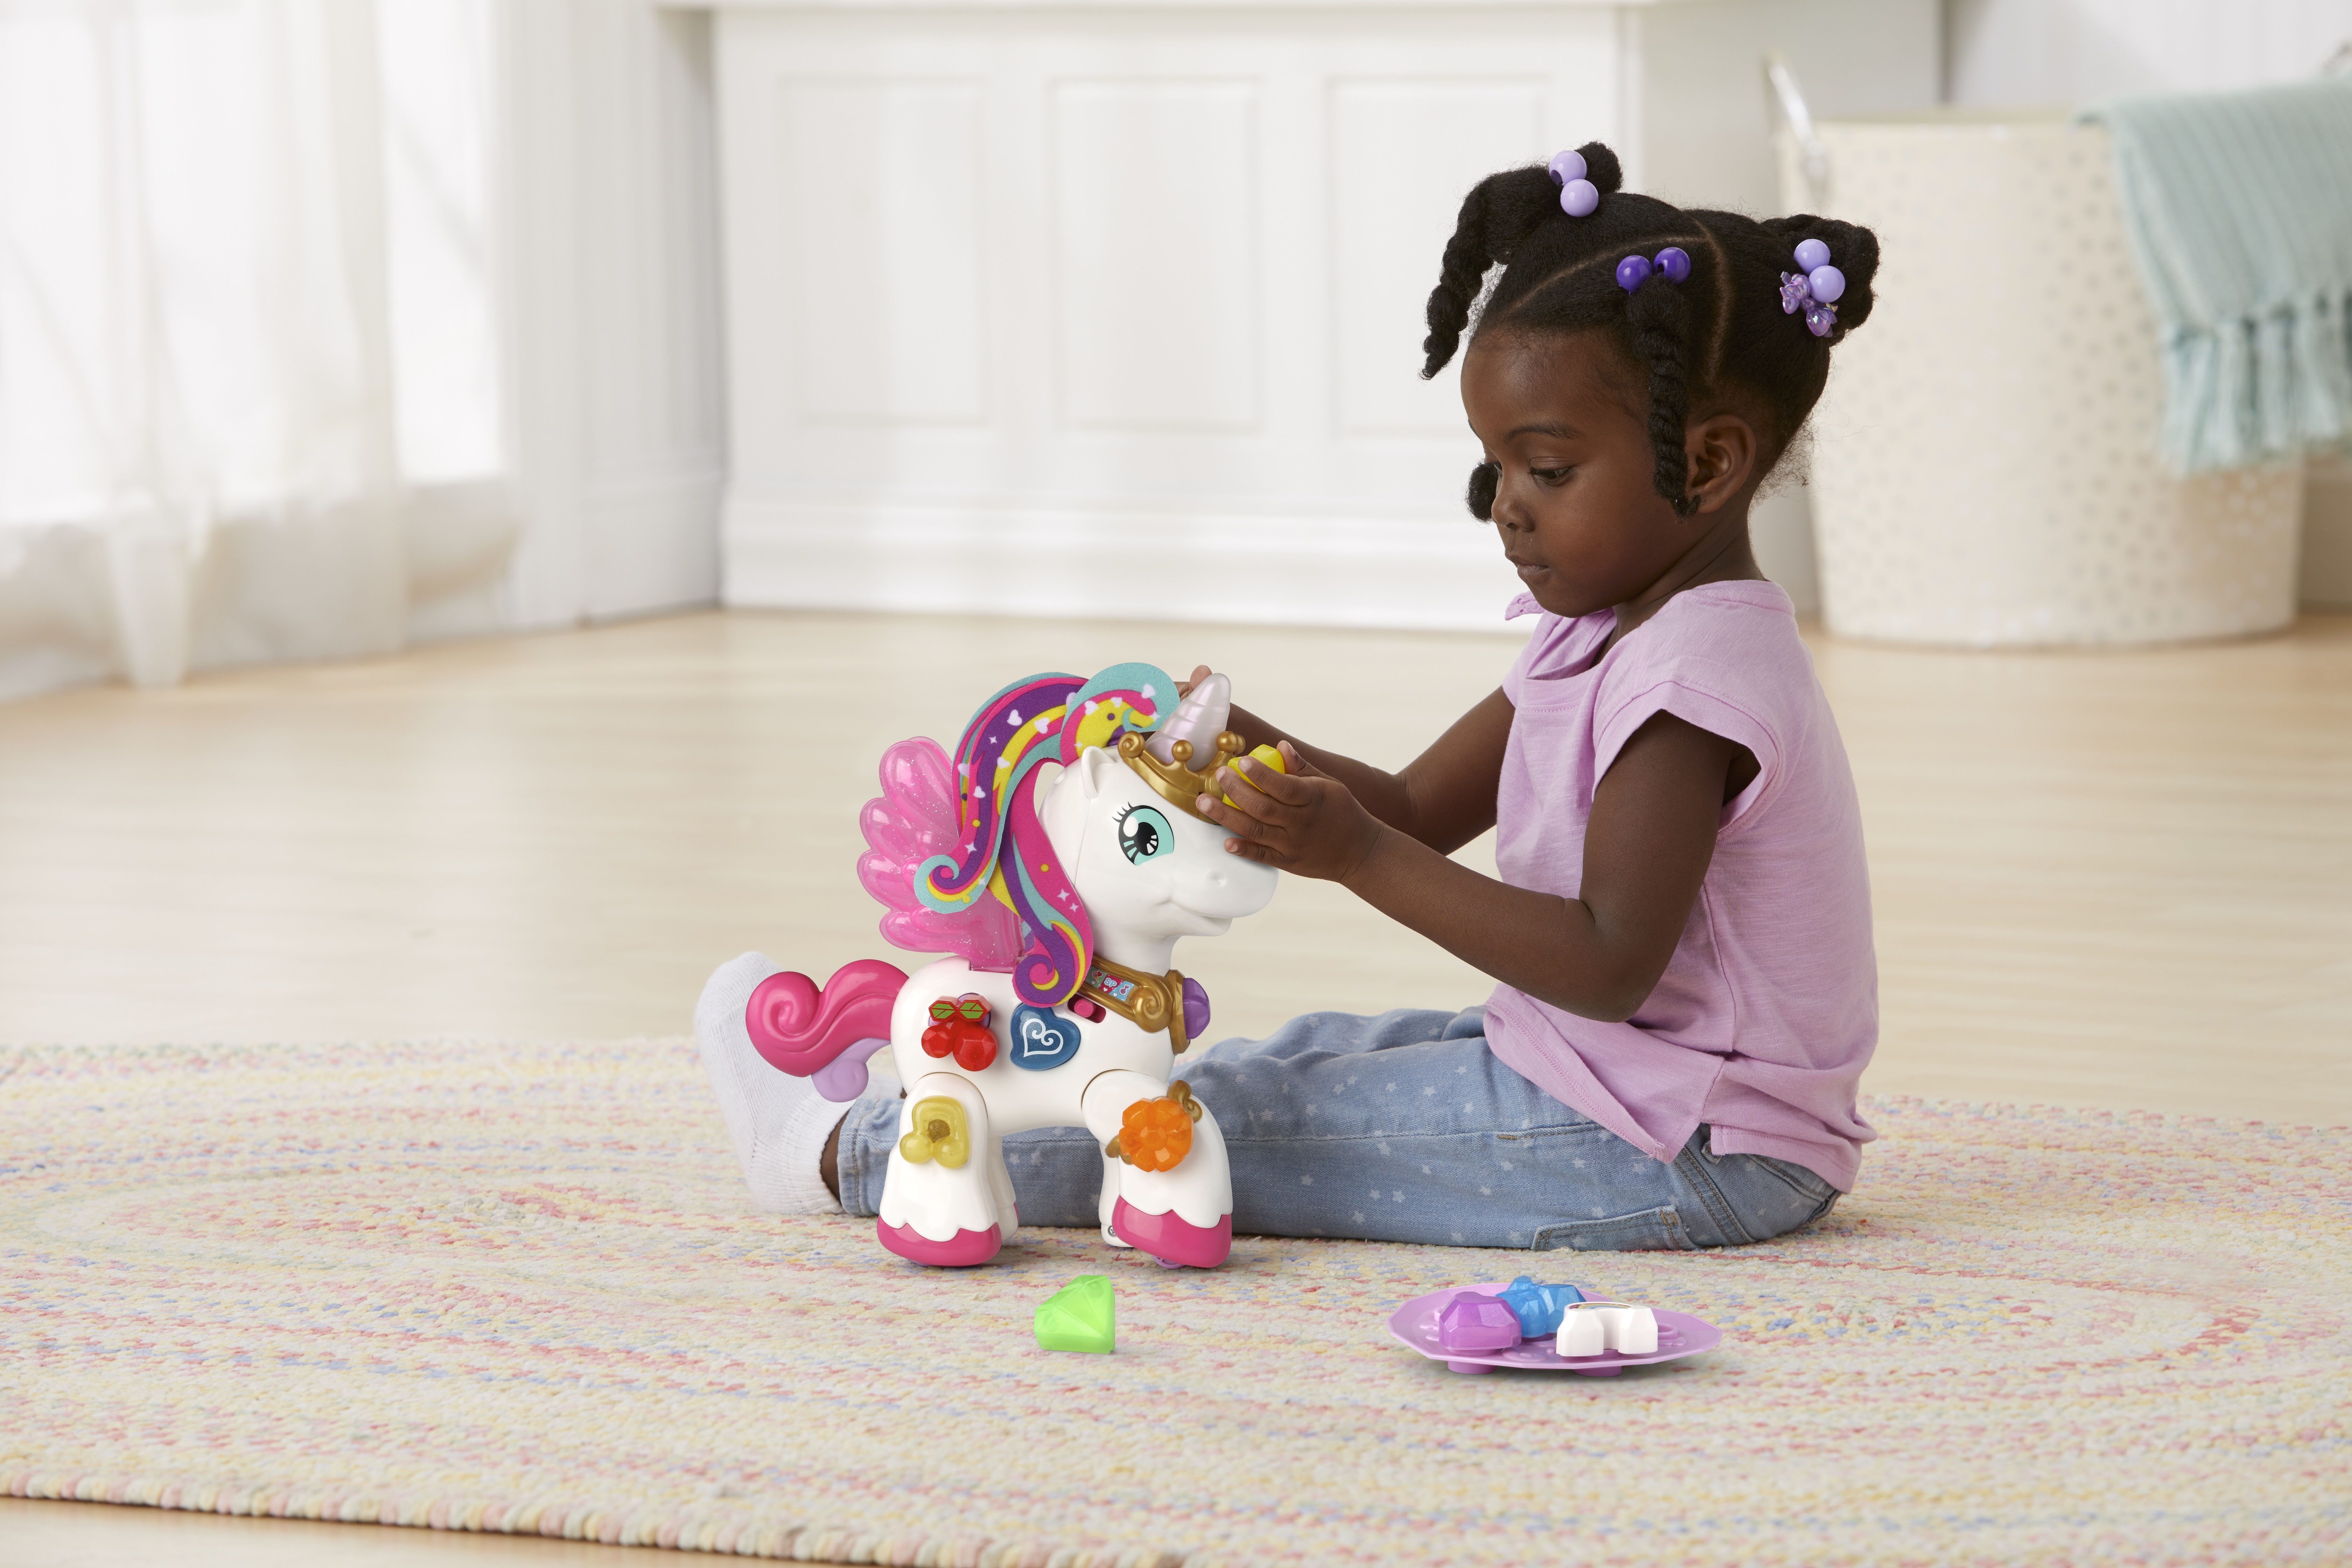 VTech Starshine the Bright Lights Unicorn, Imaginative Play Toy for Toddlers - image 4 of 12